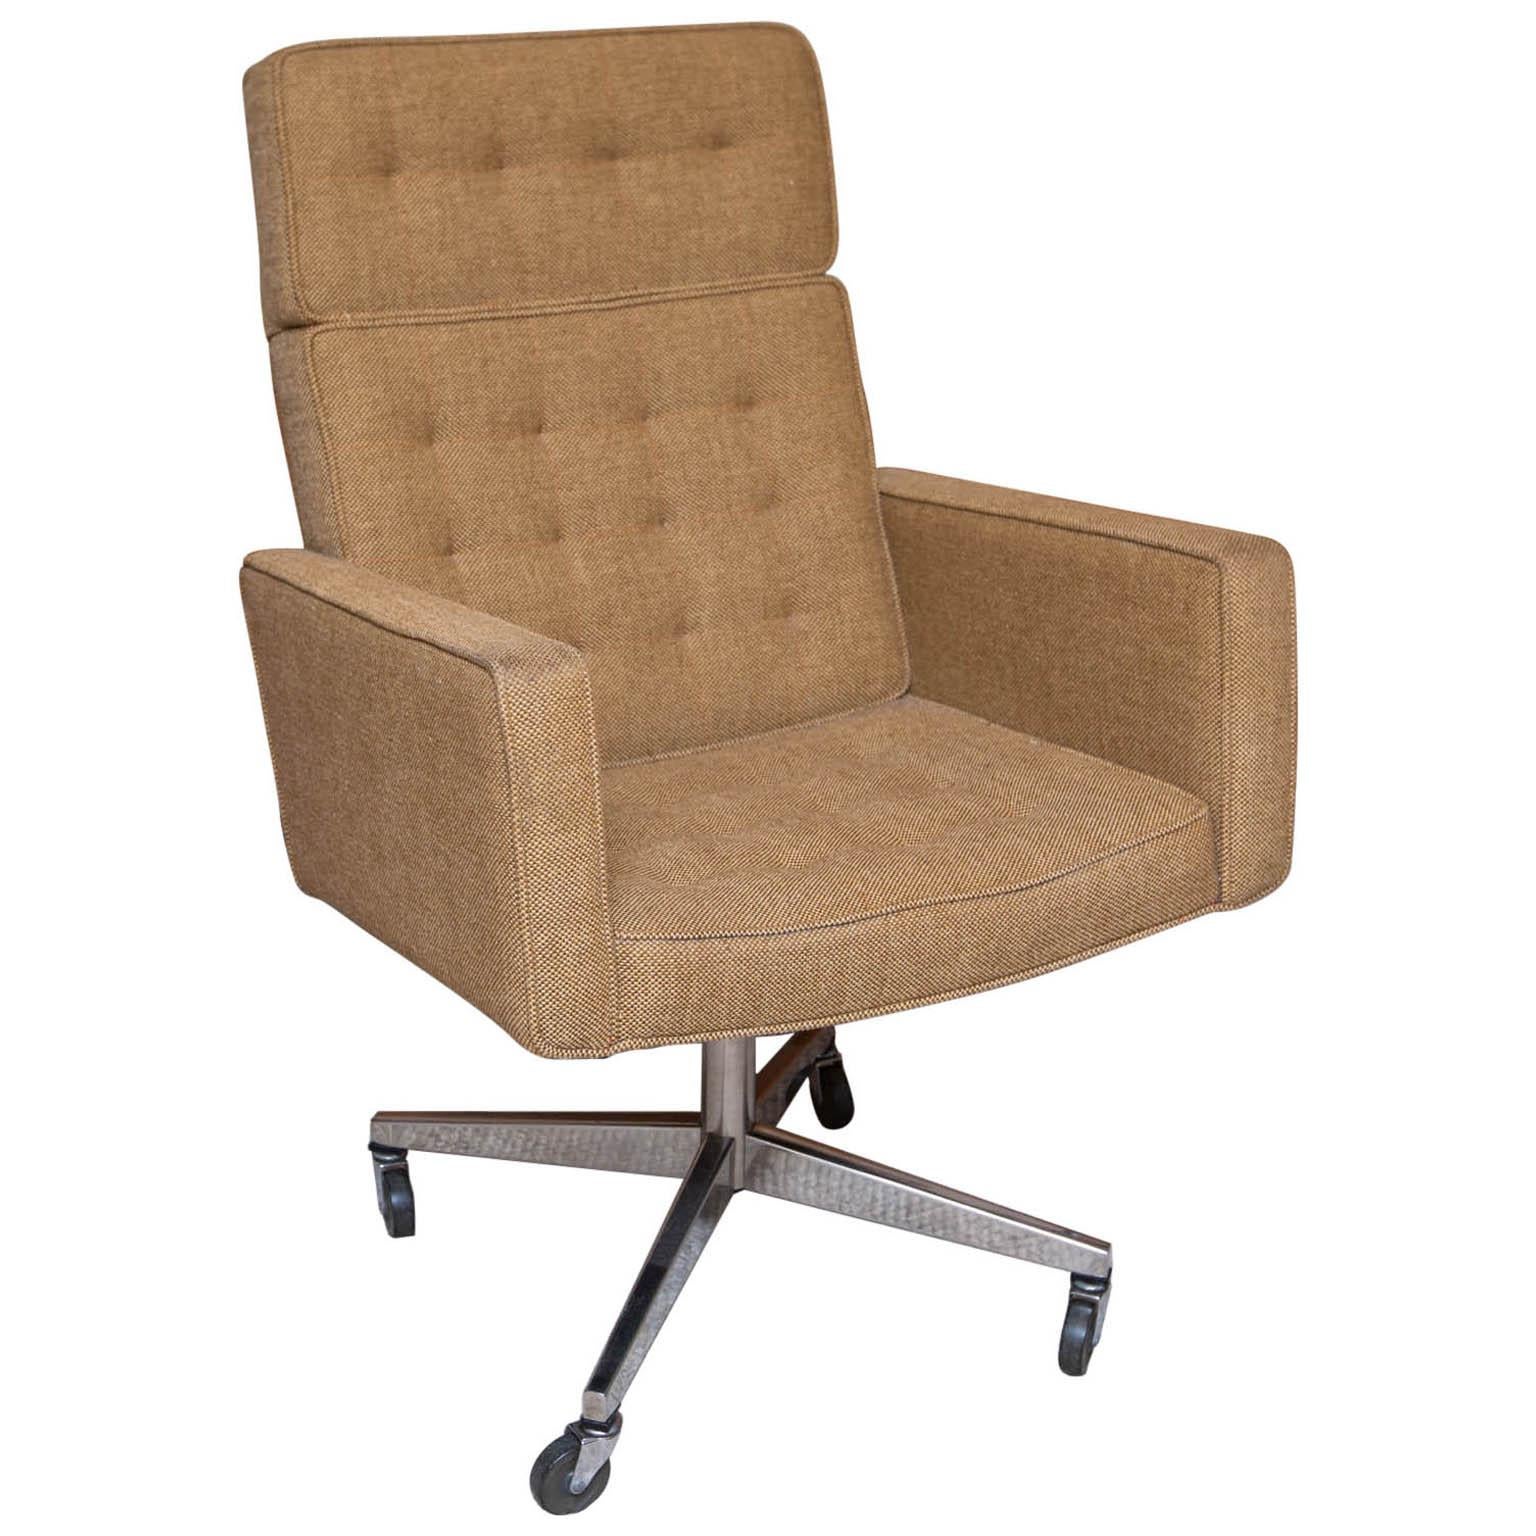 Vincent Cafiero for Knoll Executive Office or Desk Chair